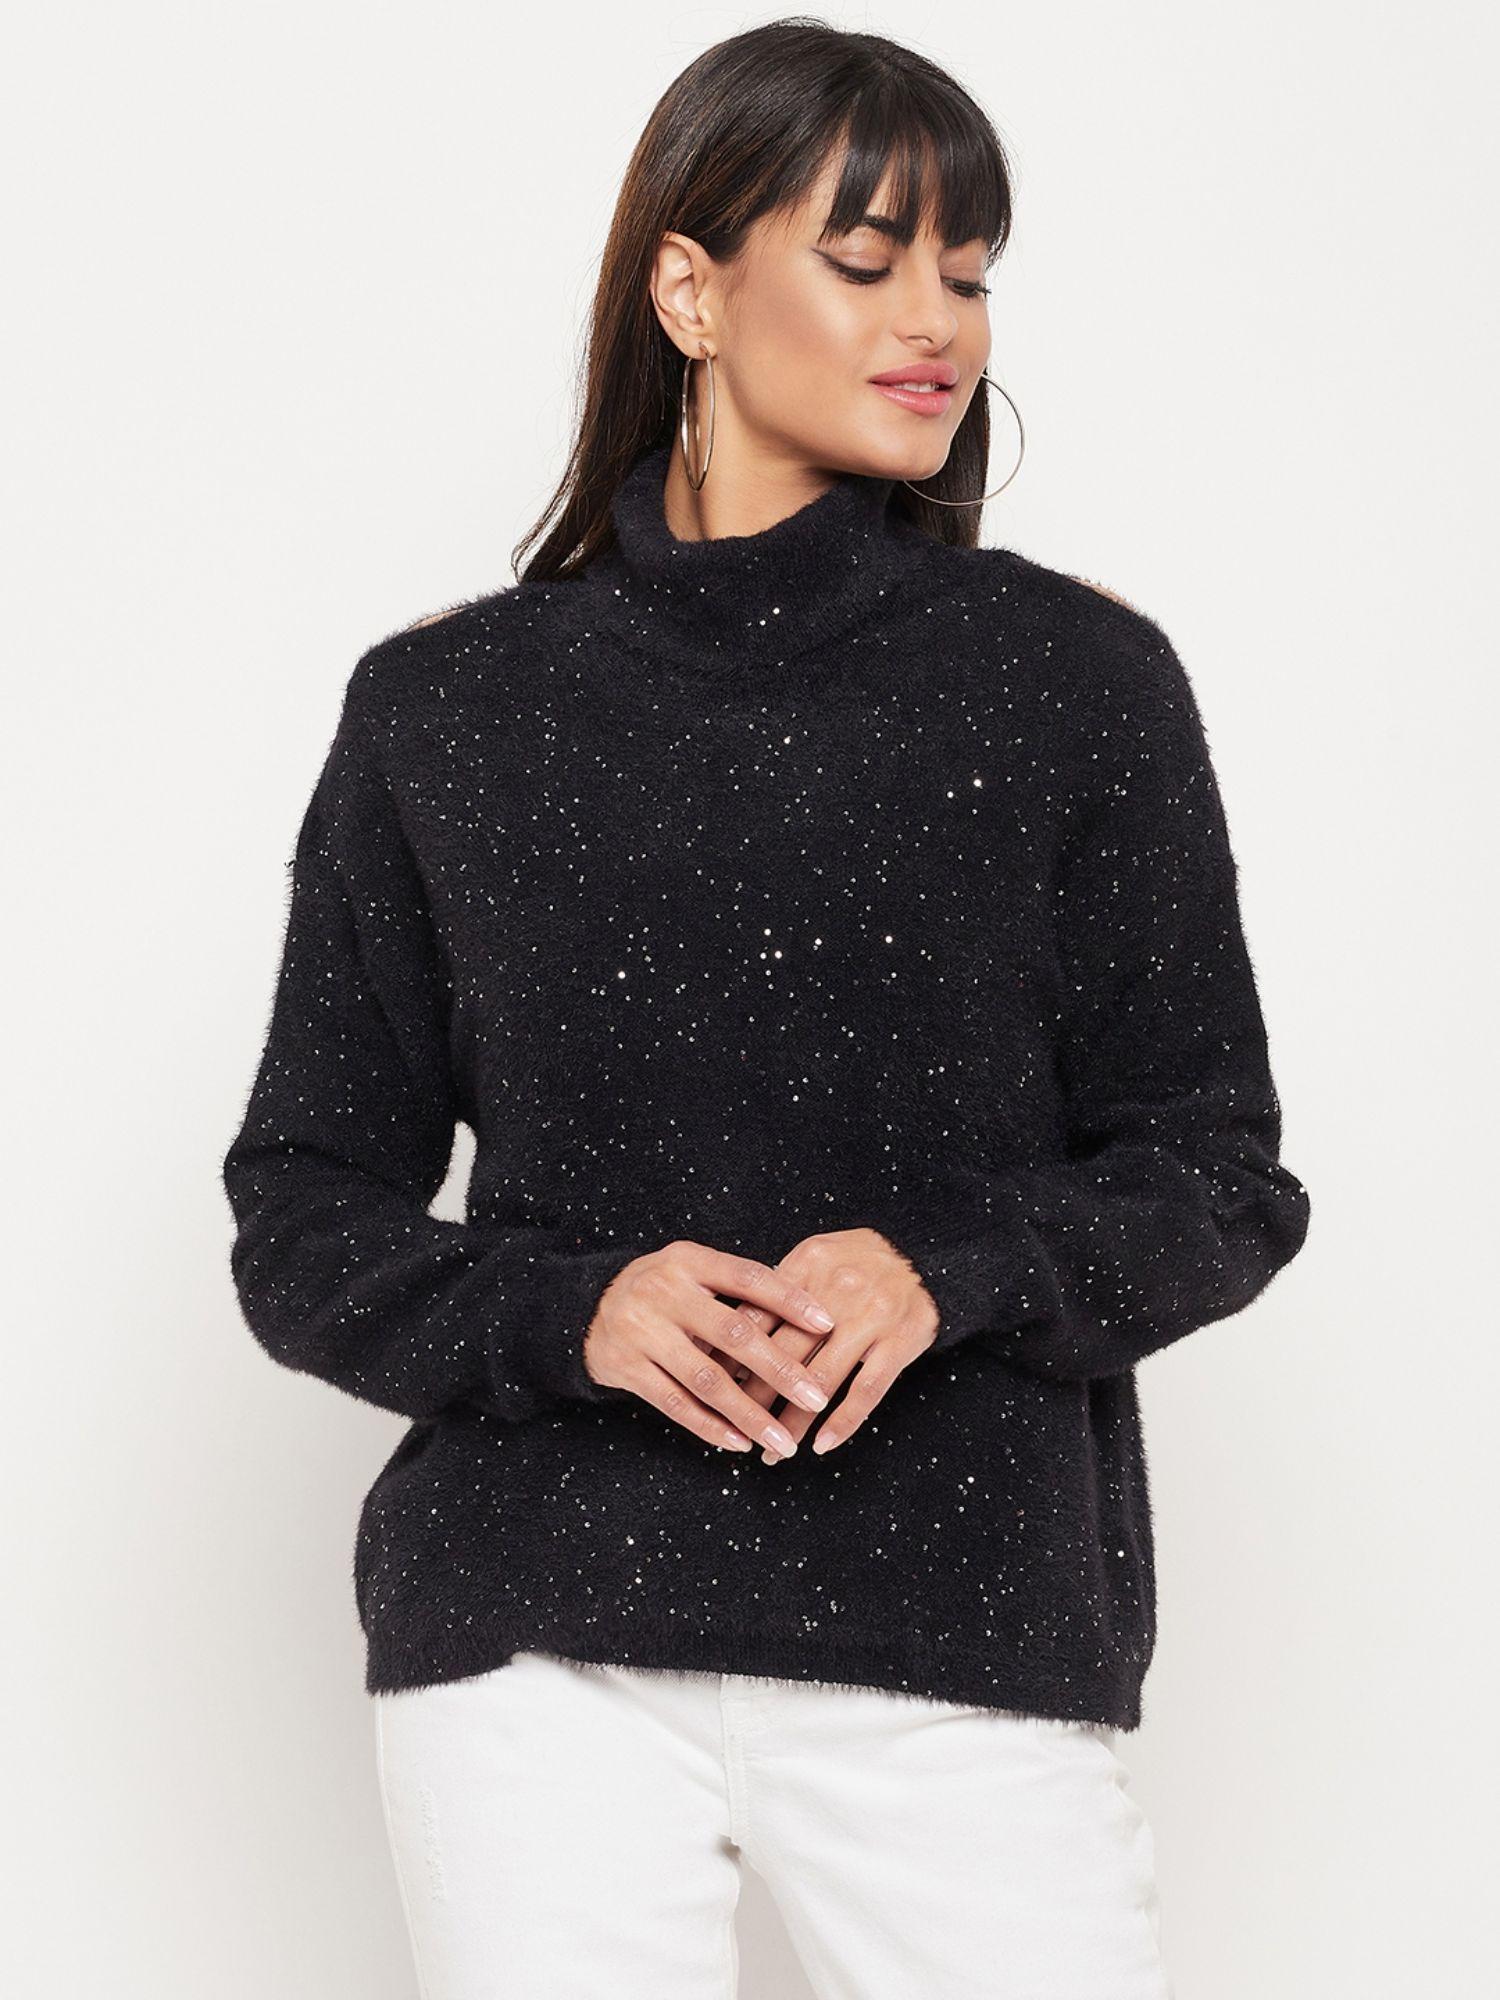 sequined black sweater